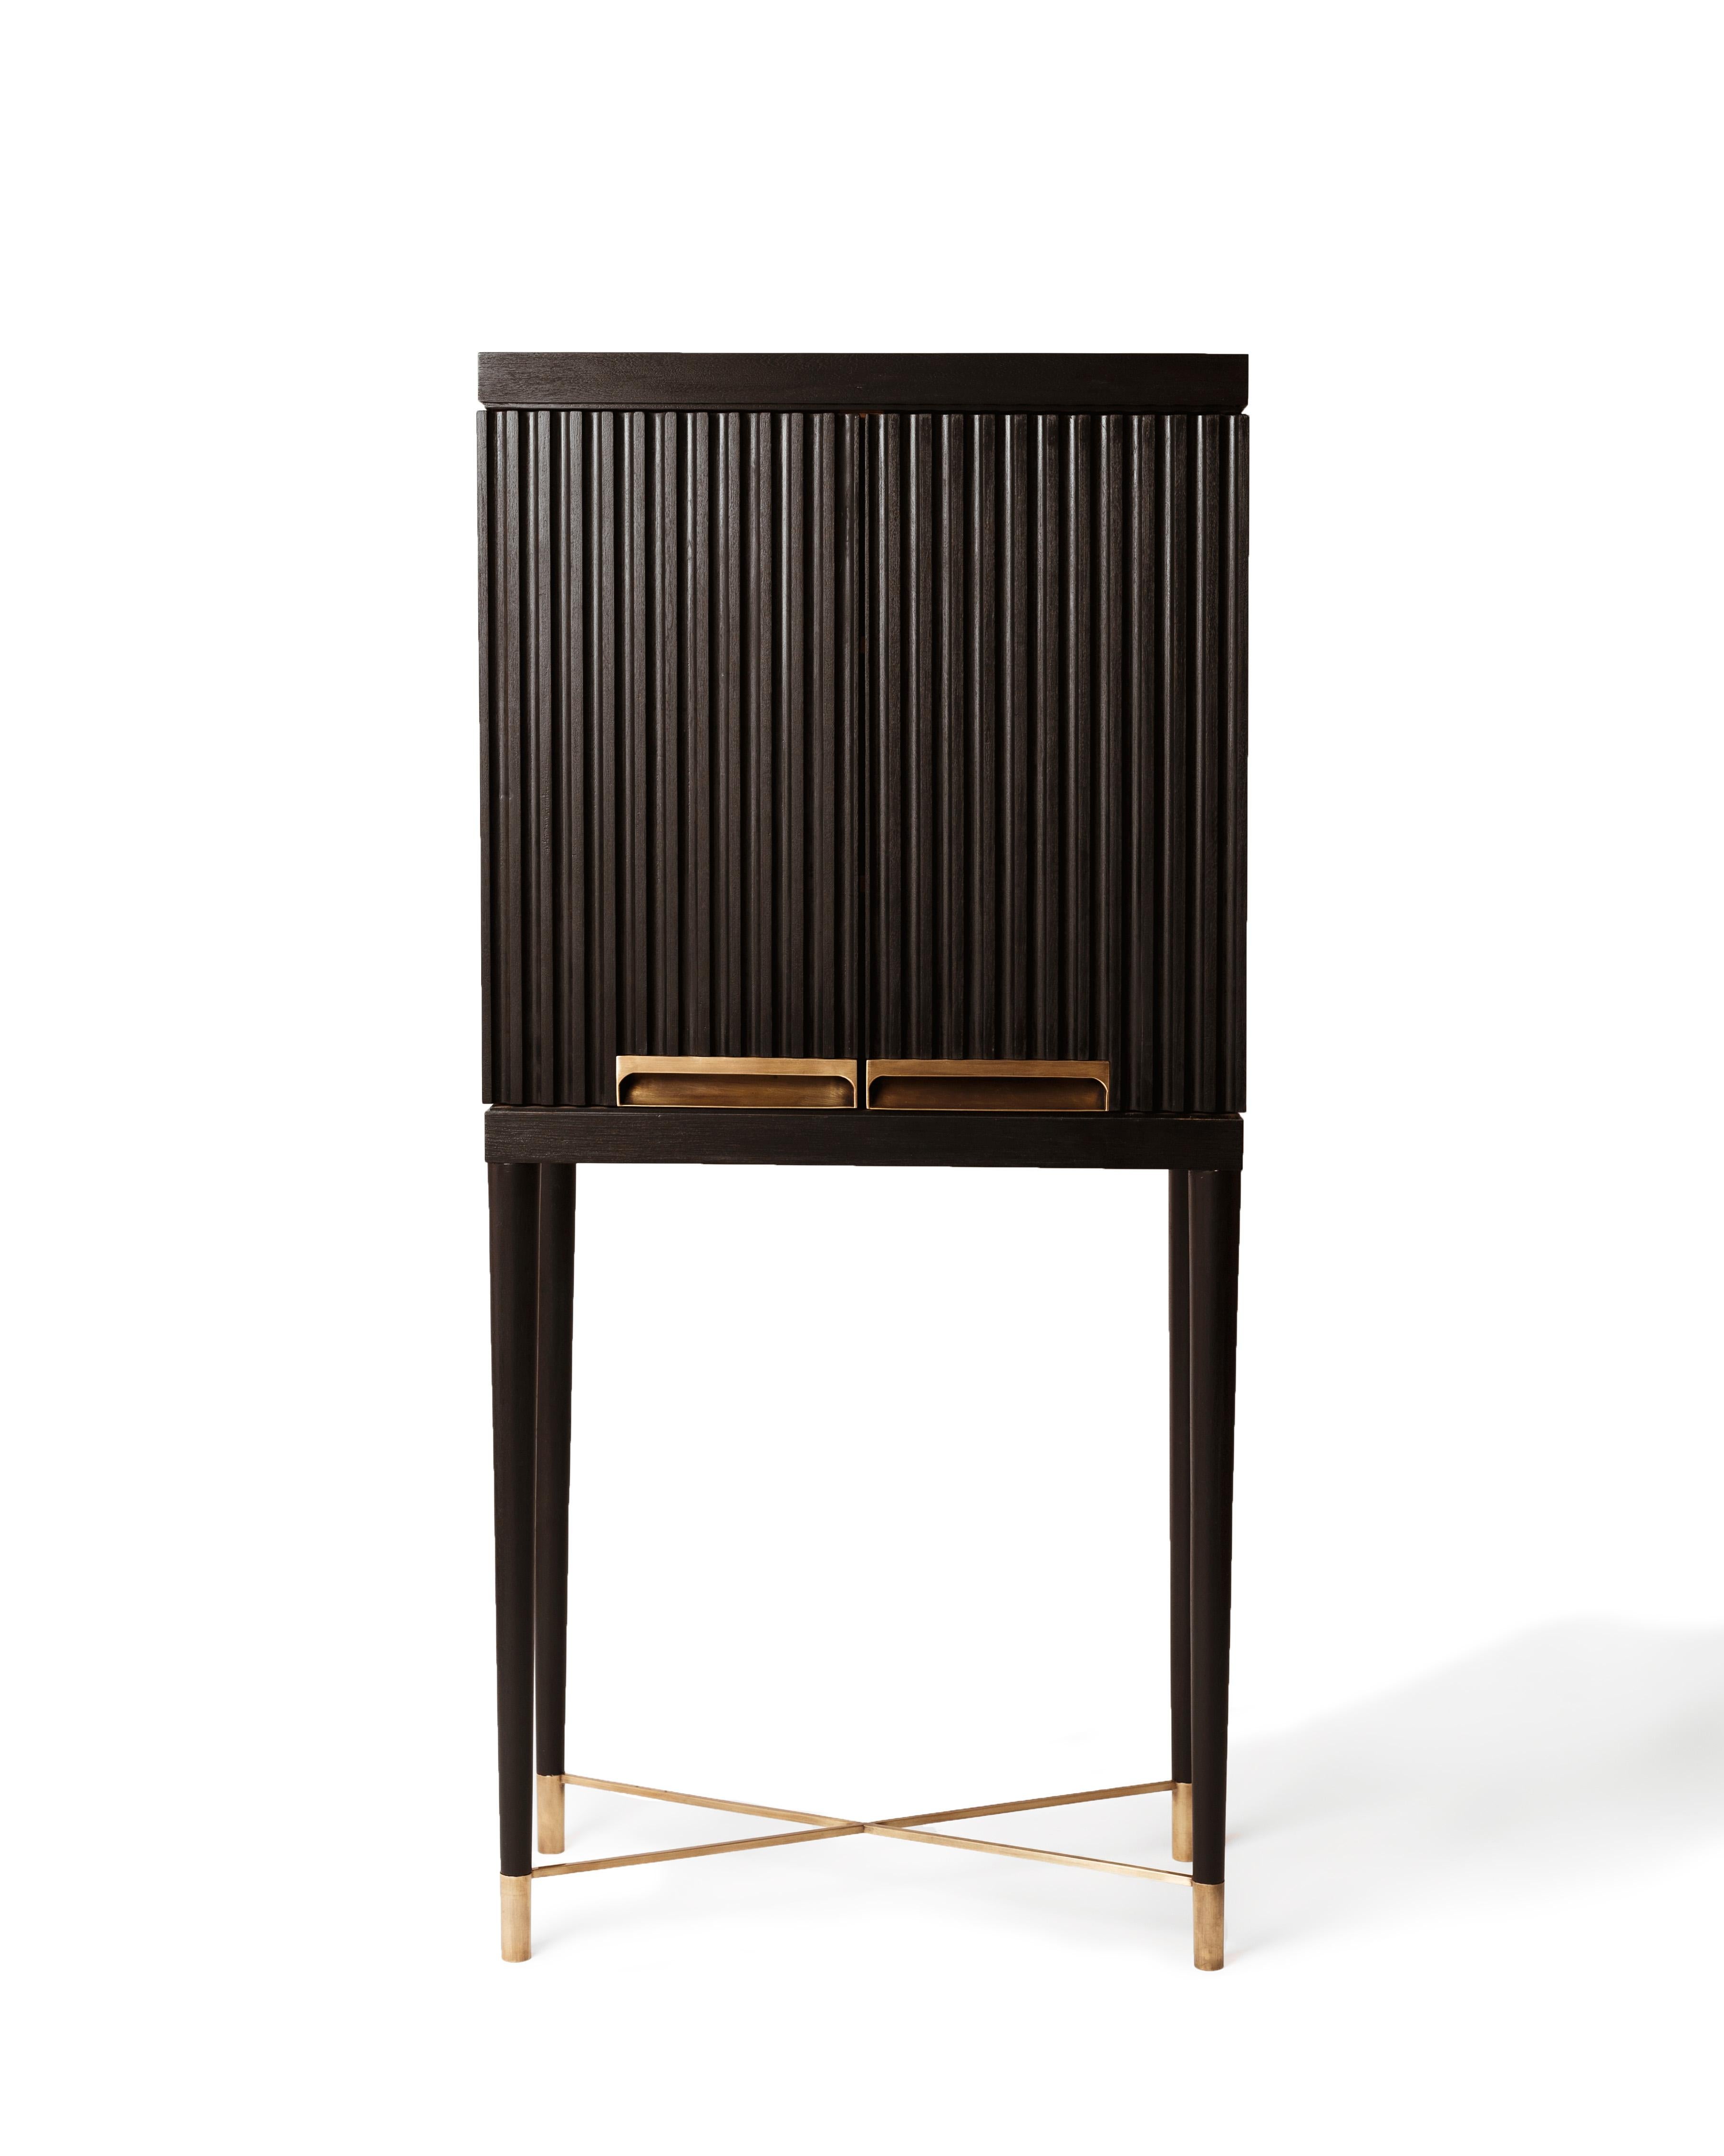 Cabinet made in mahogany and oak woods. The legs and handles are done in bronze, with its dark wood finish, creating the most elegant combination.
It ´s named the Collector ´s Cabinet because it is a piece every amateur or lifelong collector should